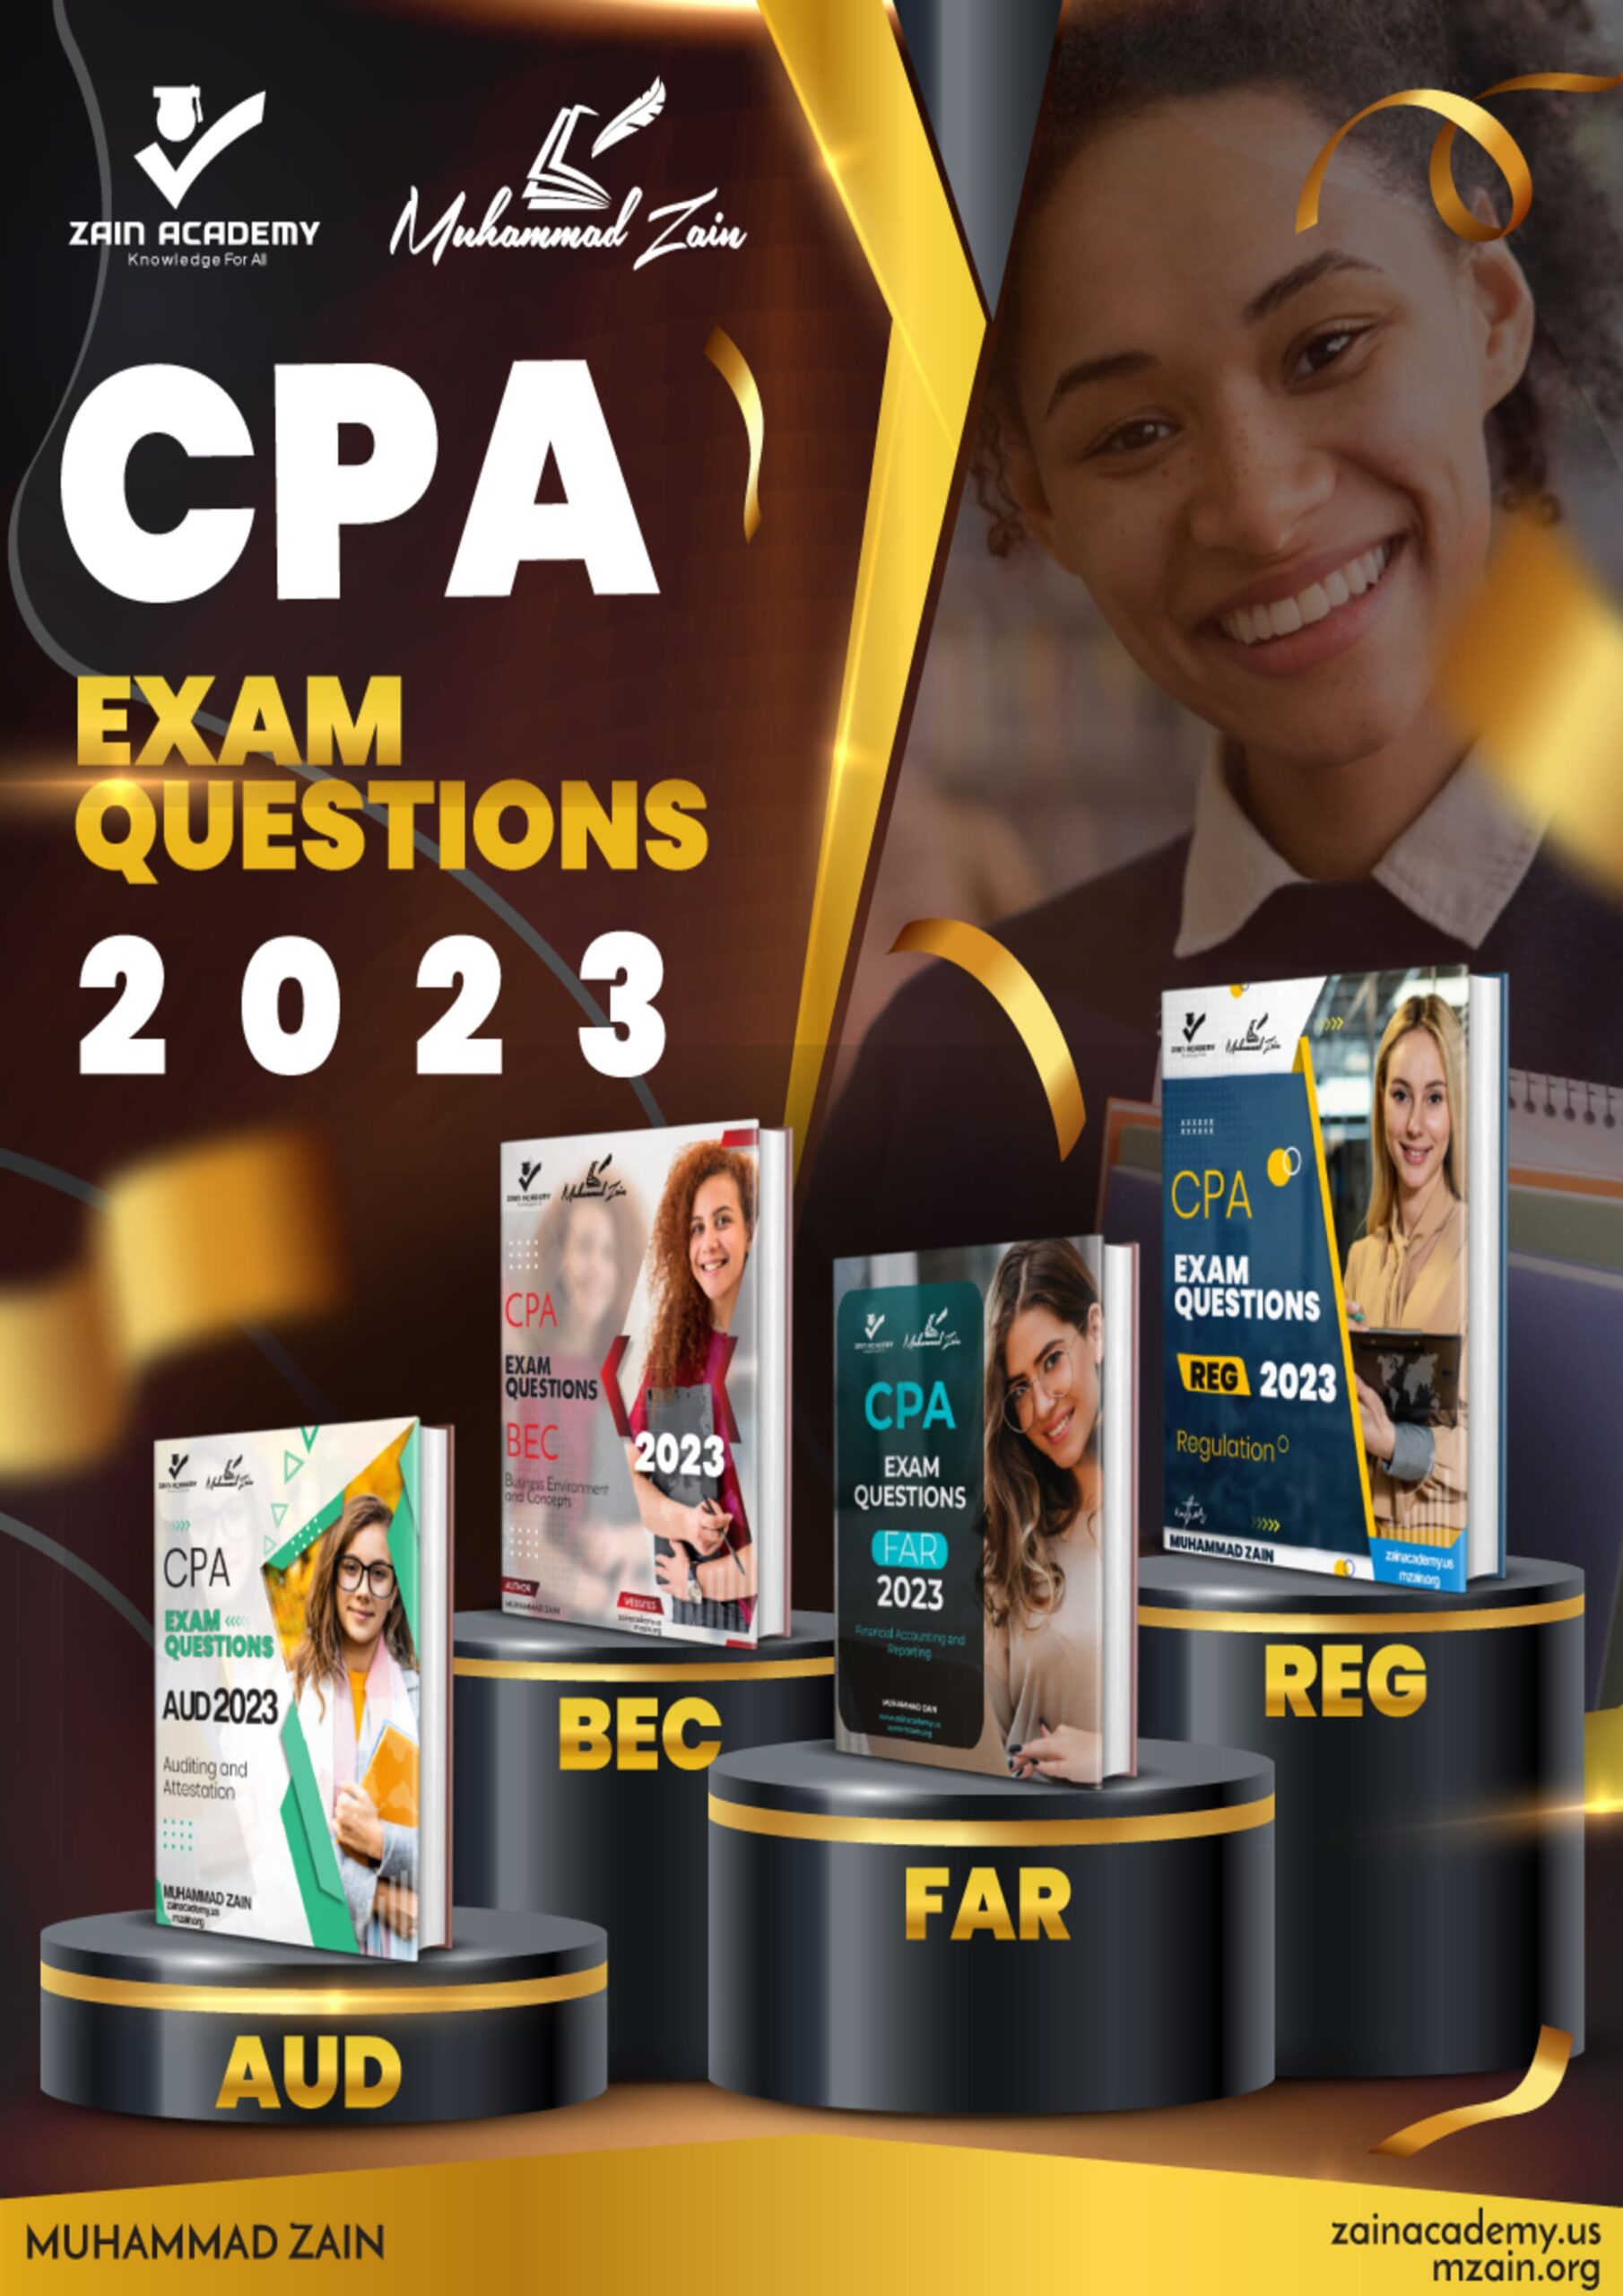 certified public accountant (cpa) exam questions 2023